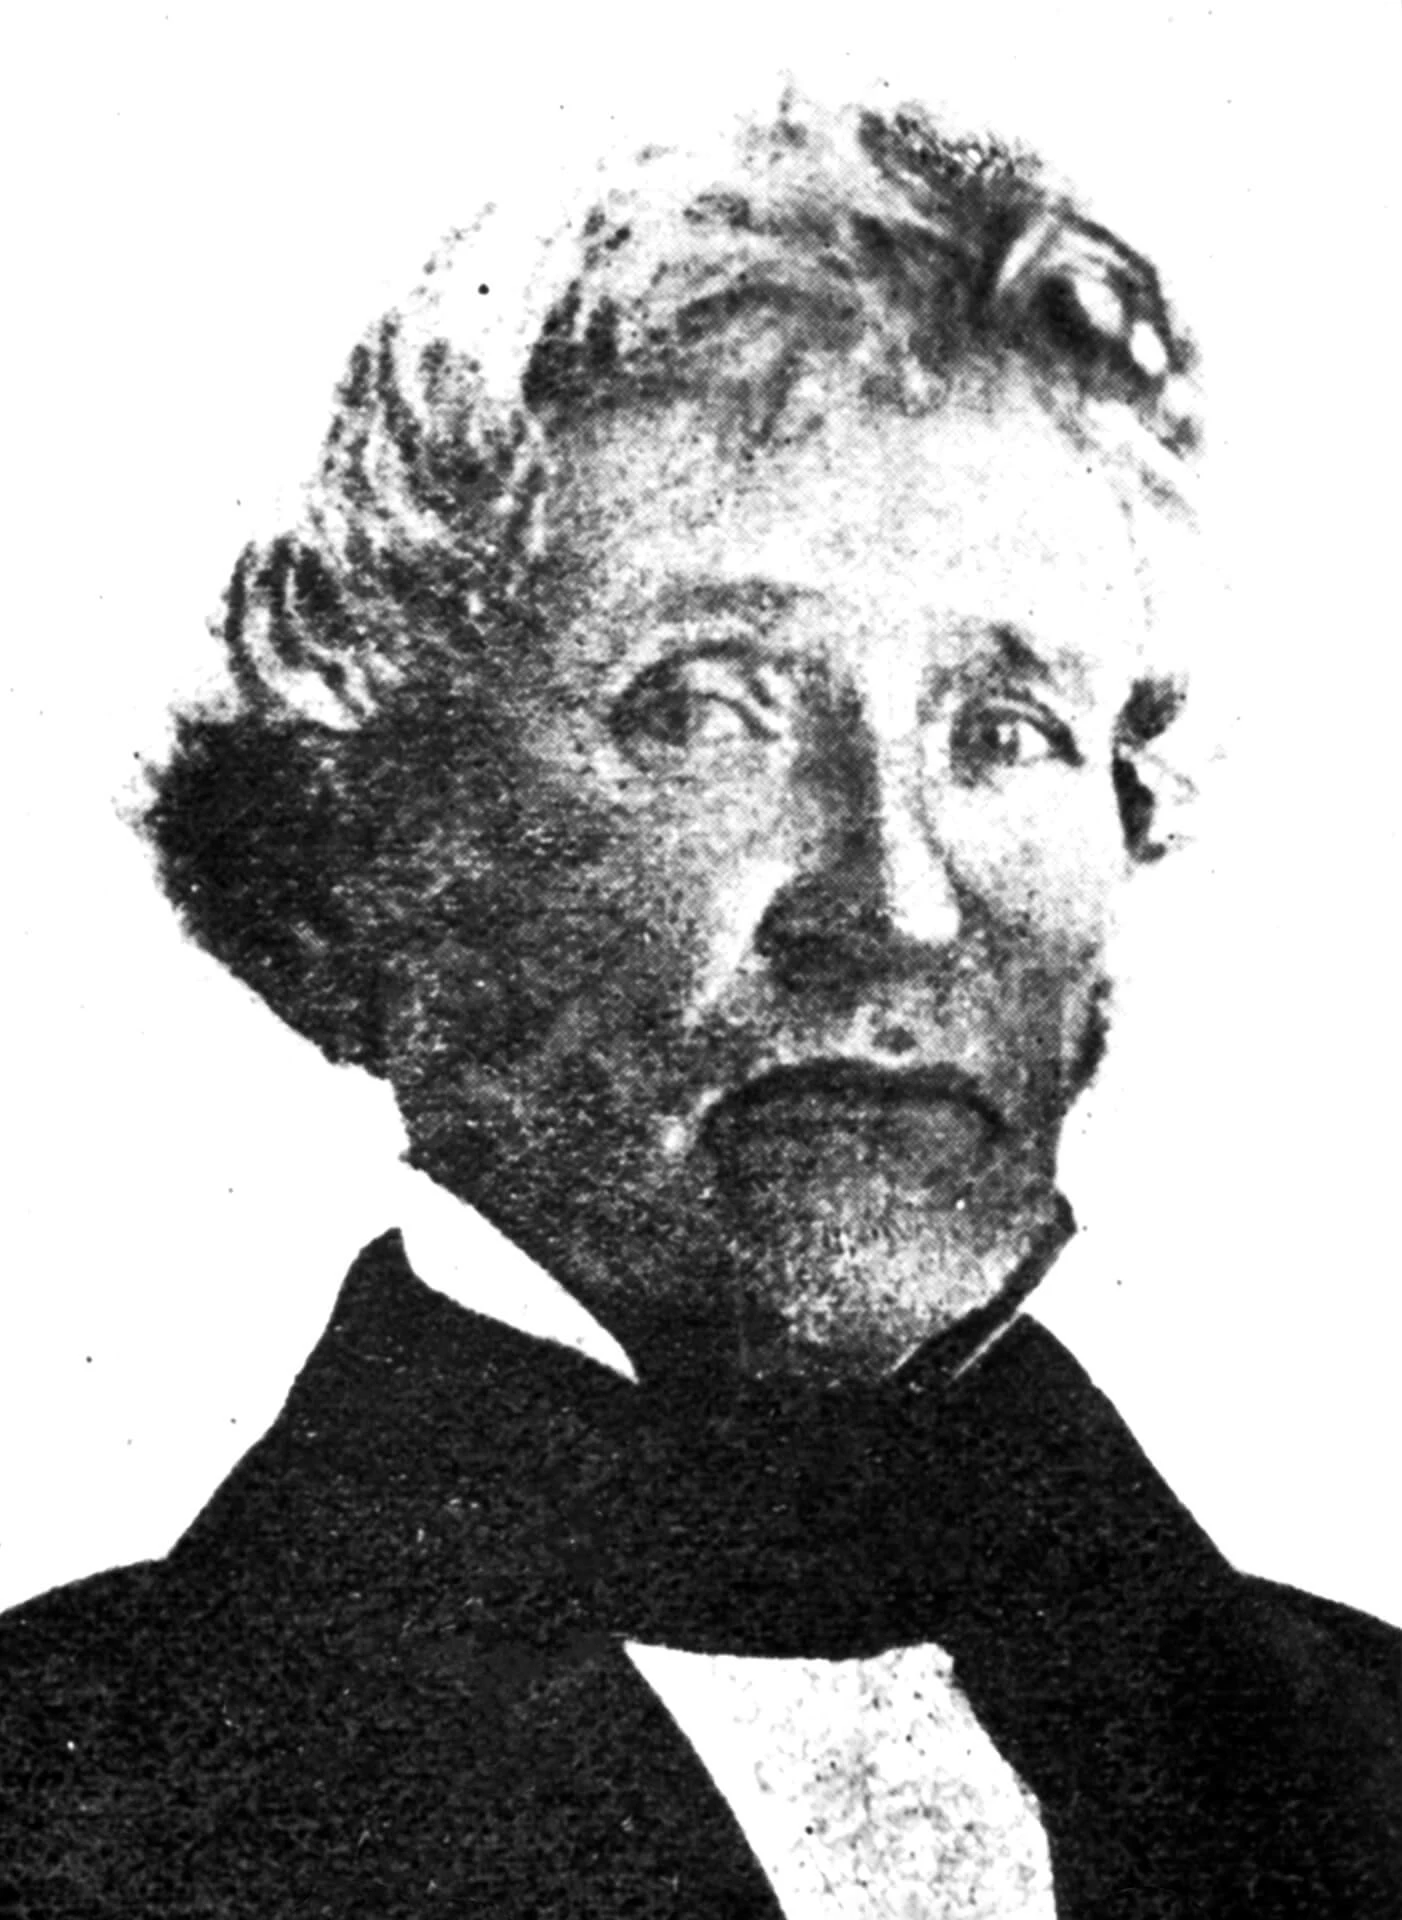 a fuzzy black and white illustration of a white man with somewhat messy hair and a black suit jacket